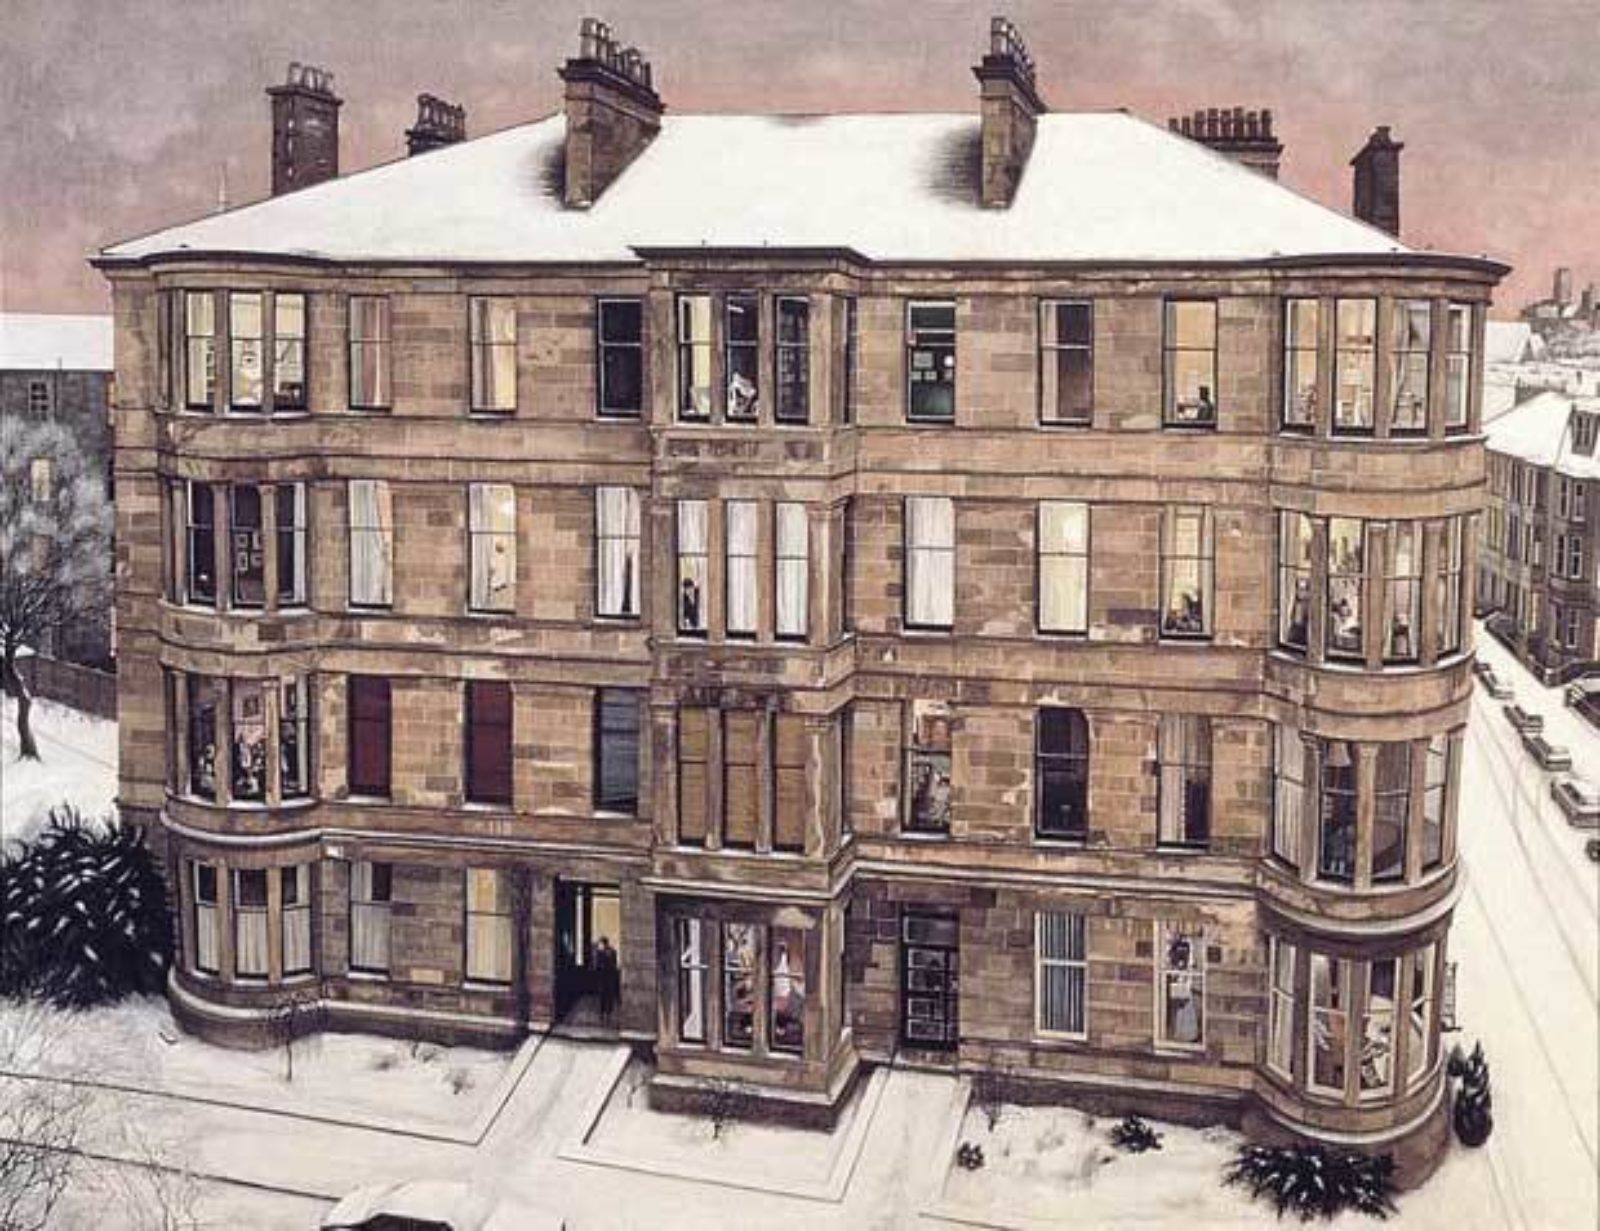 Avril Paton's painting 'Windows in the West' which is a painting of a West End tenement in the snow.